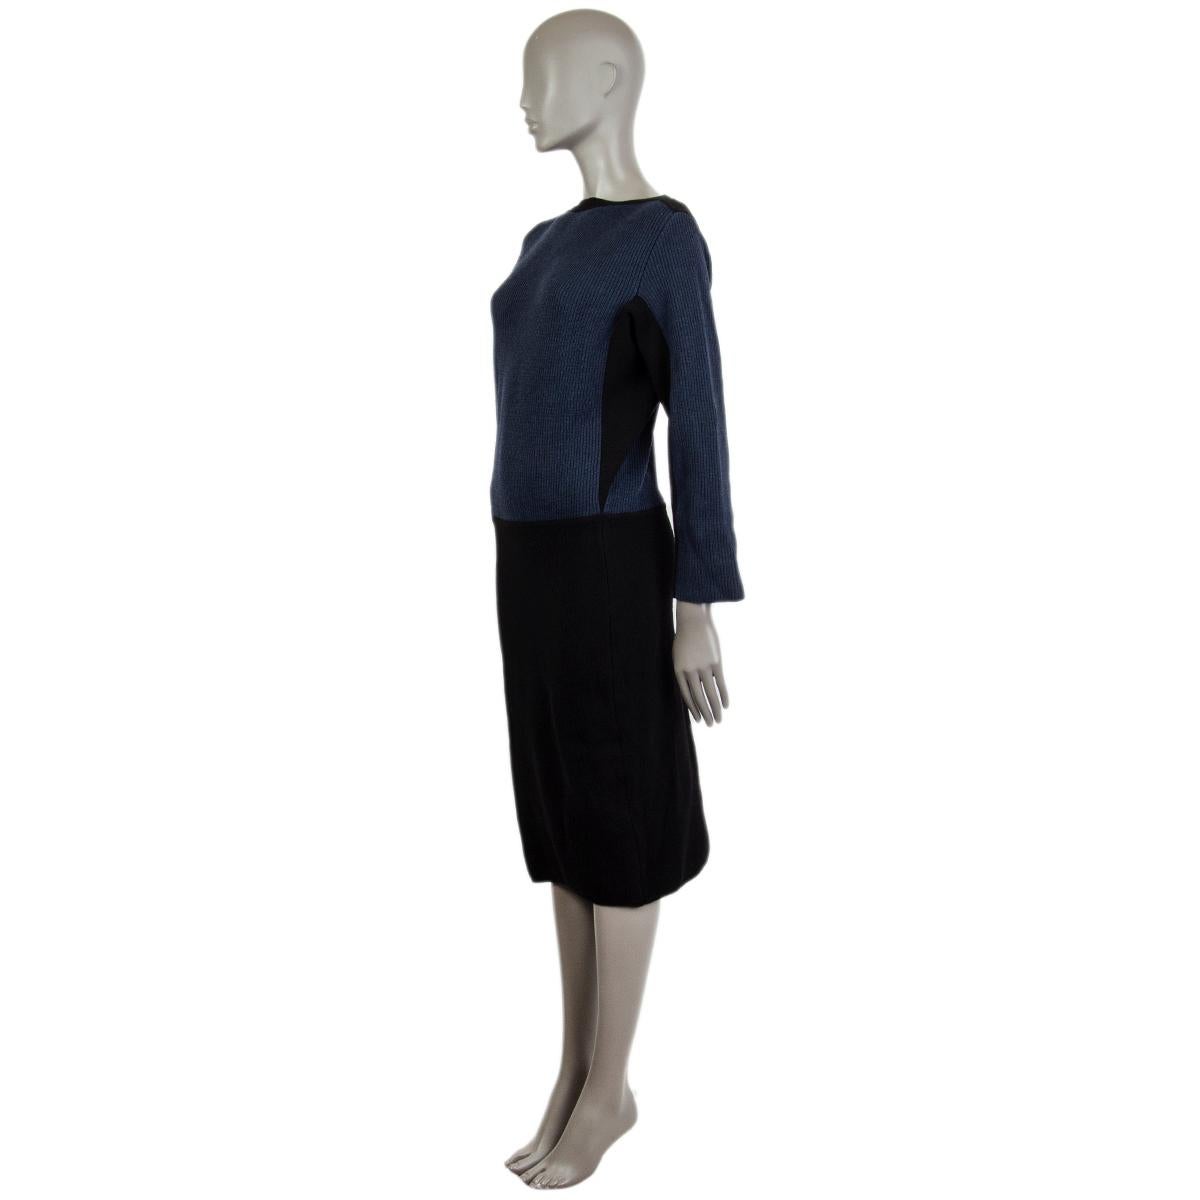 Alaia color-block fleece wool knitted dress in black and navy blue virgin wool (100%) with a boat neck, mid-weight rib, long sleeves, comfy top with a fitted bottom. Unlined. Has been worn and is in excellent condition.

Tag Size 40
Size M
Shoulder